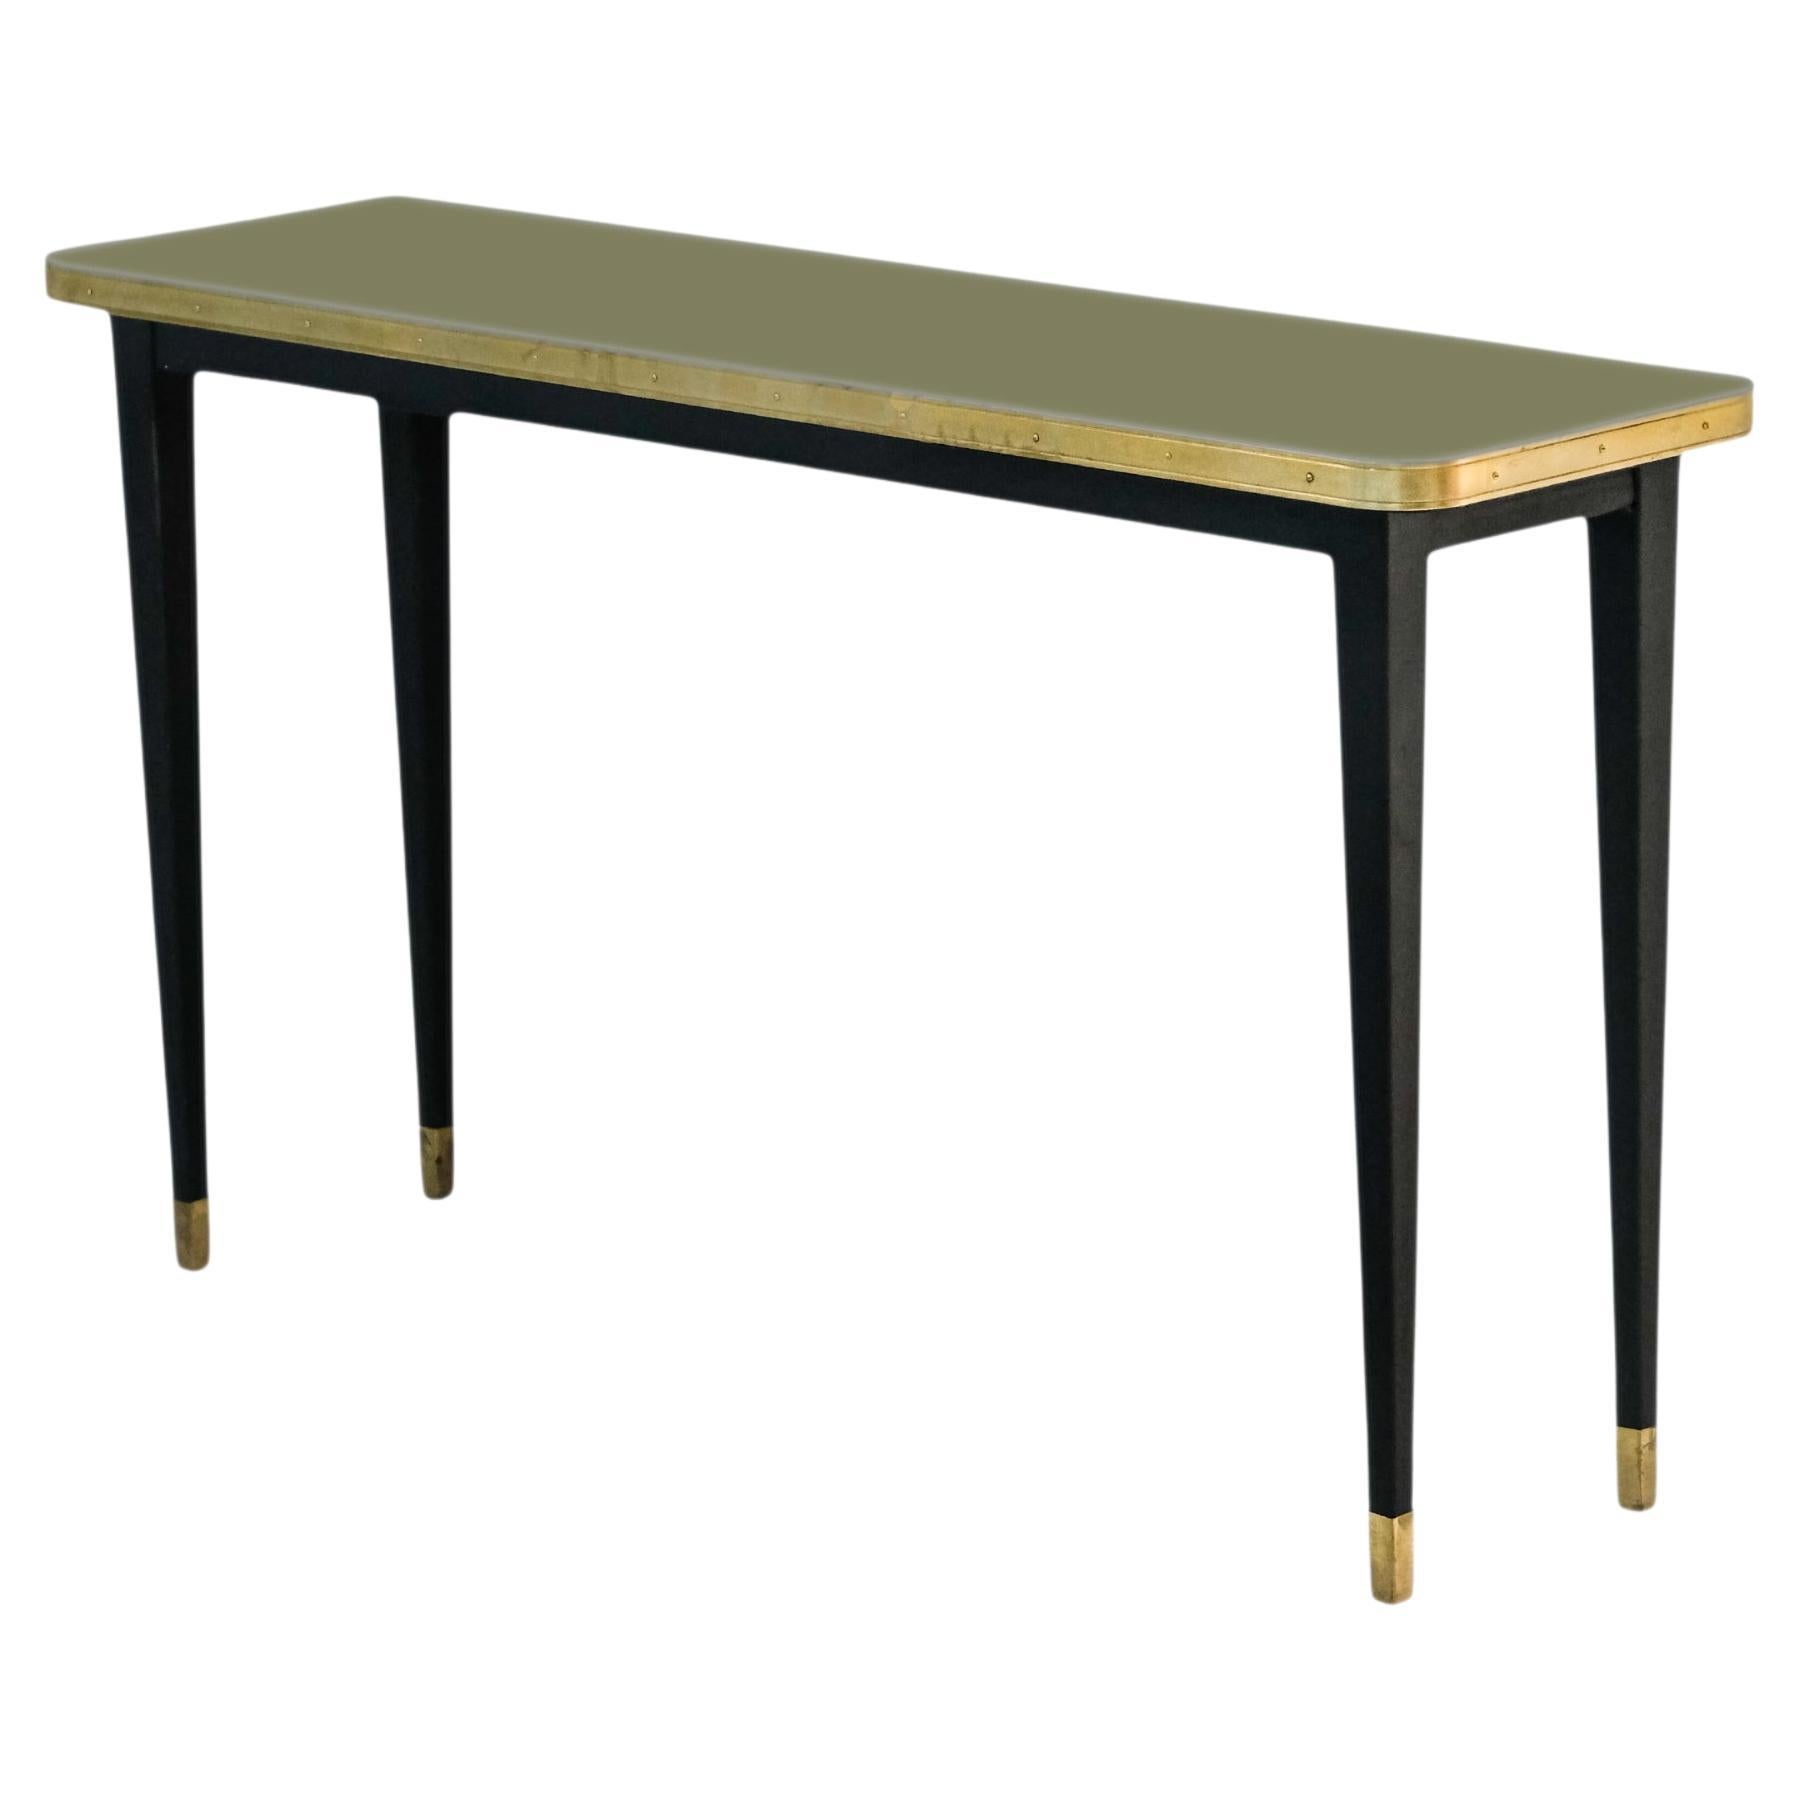 Console Table, High Gloss Laminate & Brass Details, Kashmir Green - M For Sale